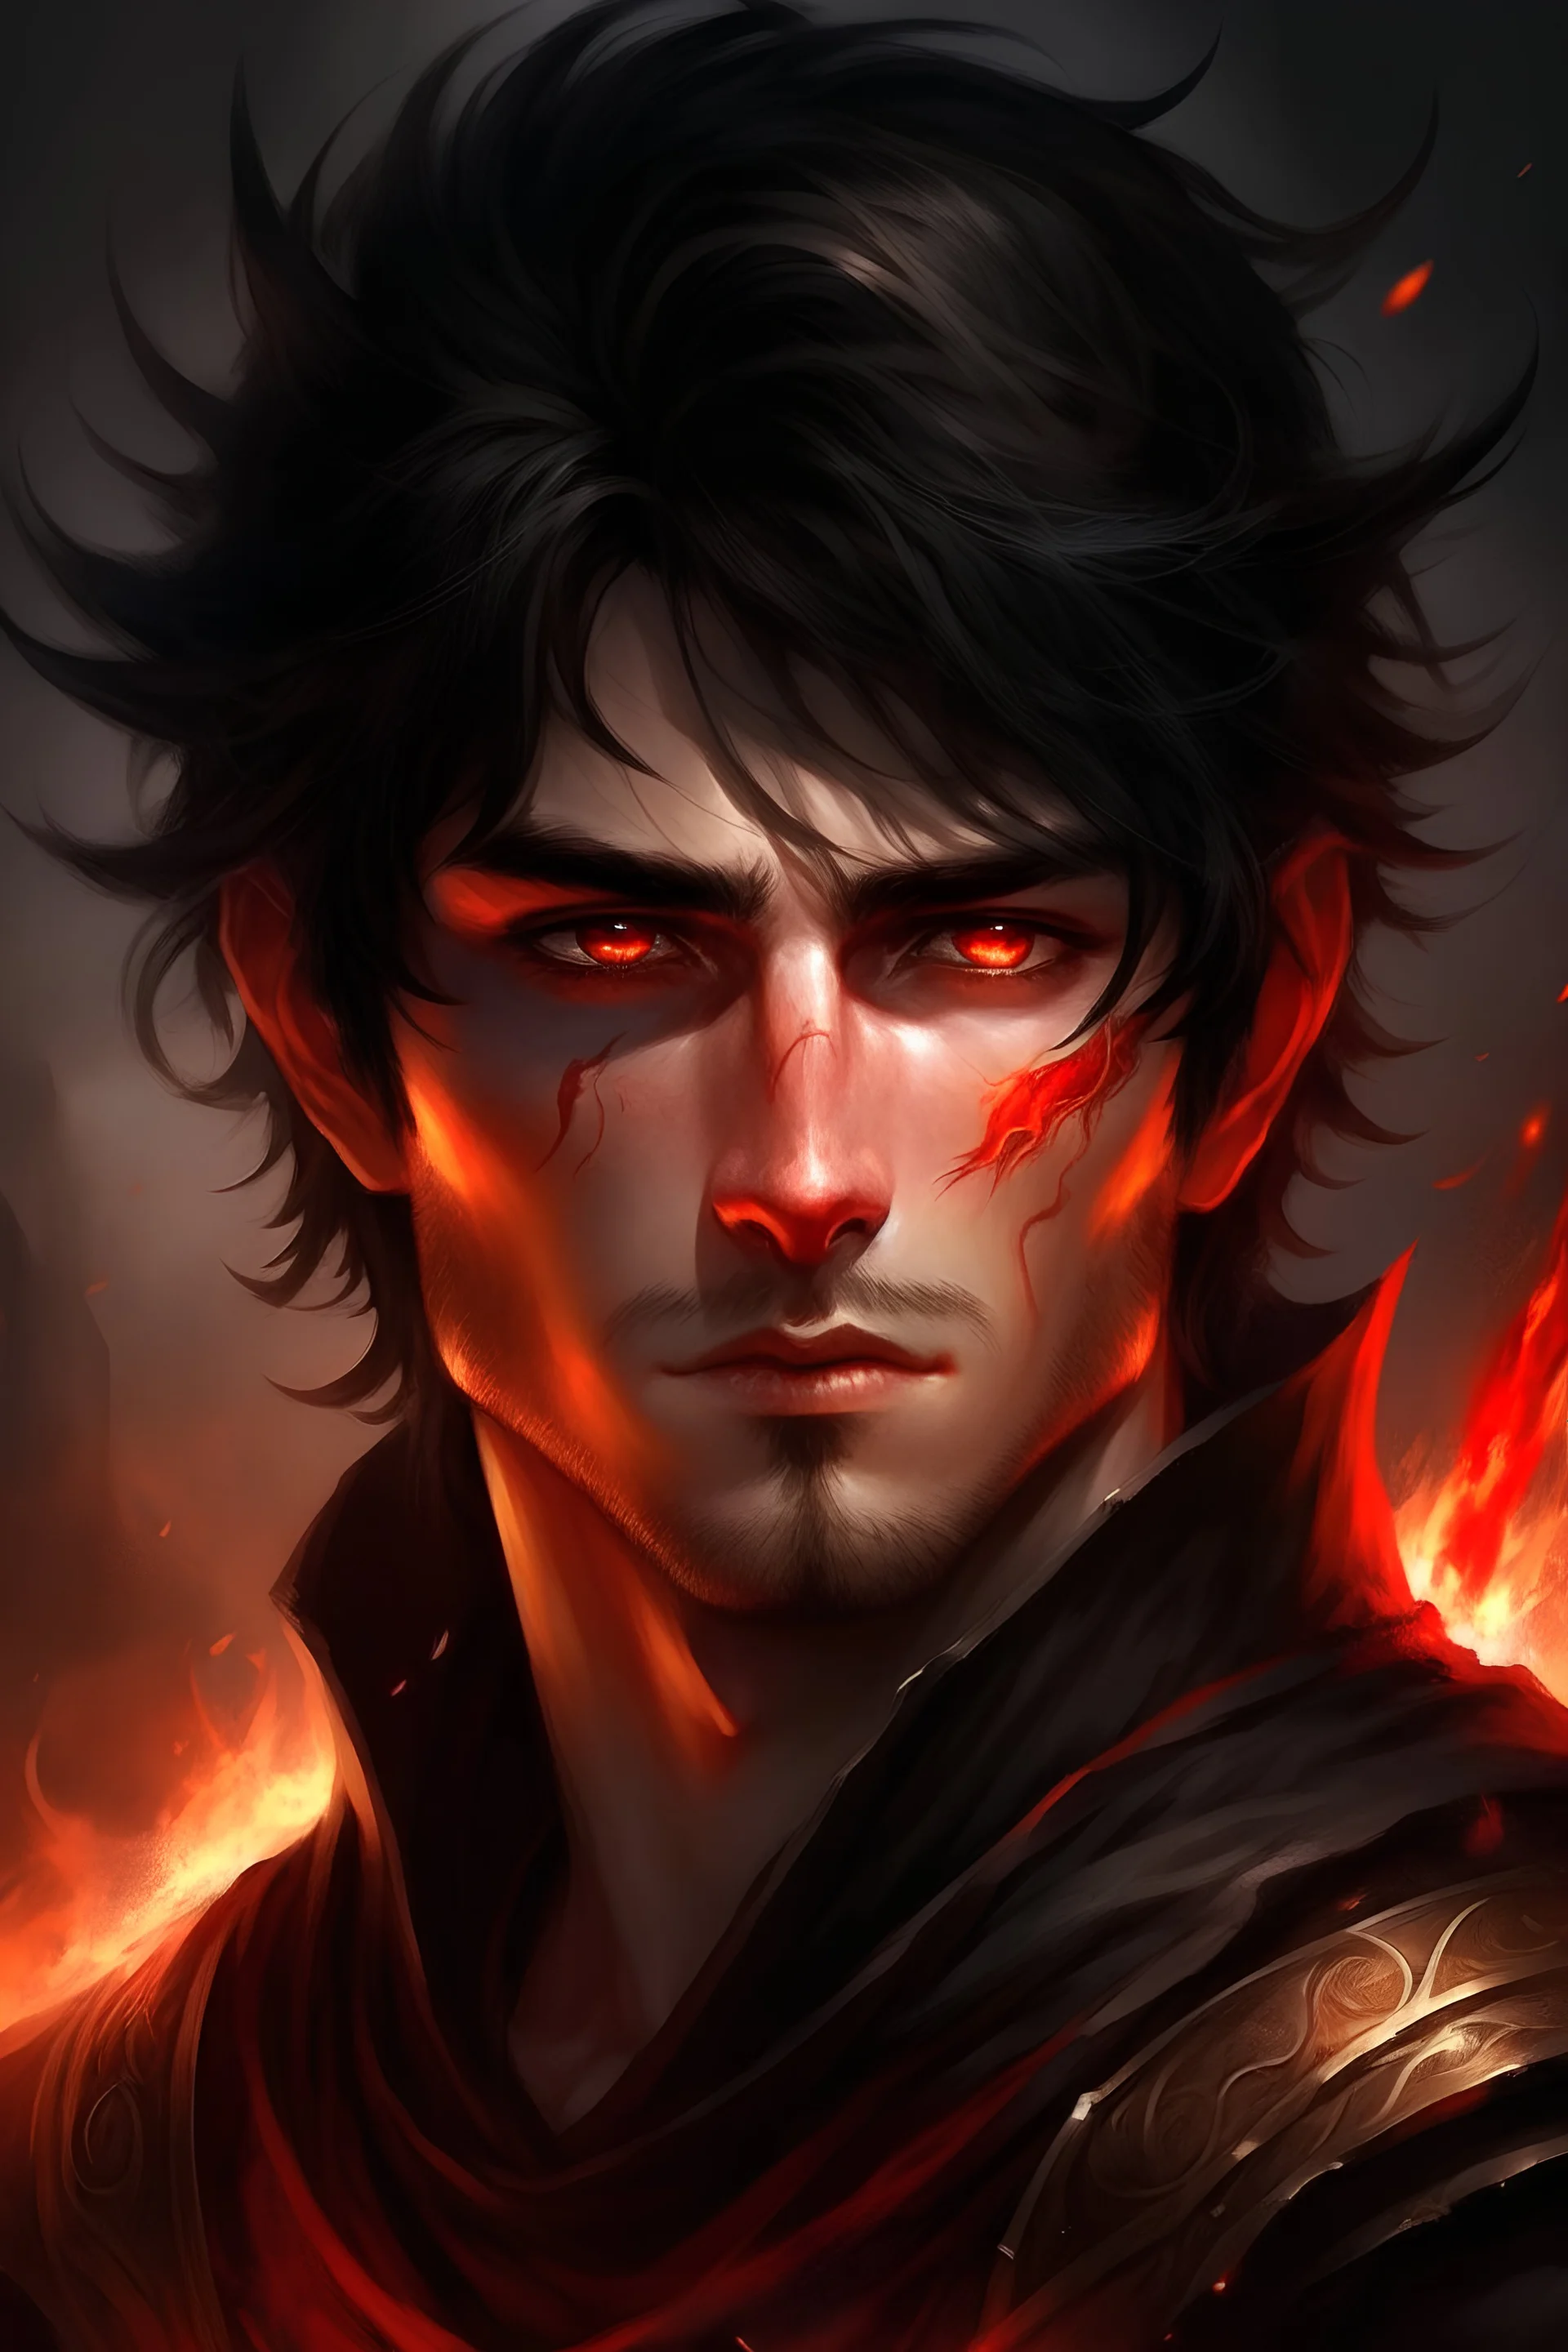 A young striking fantasy Lord Of The Rings like man with black messy hair and short beard, exuding an air of fierceness. His fiery red eyes hint at mystery and intelligence.